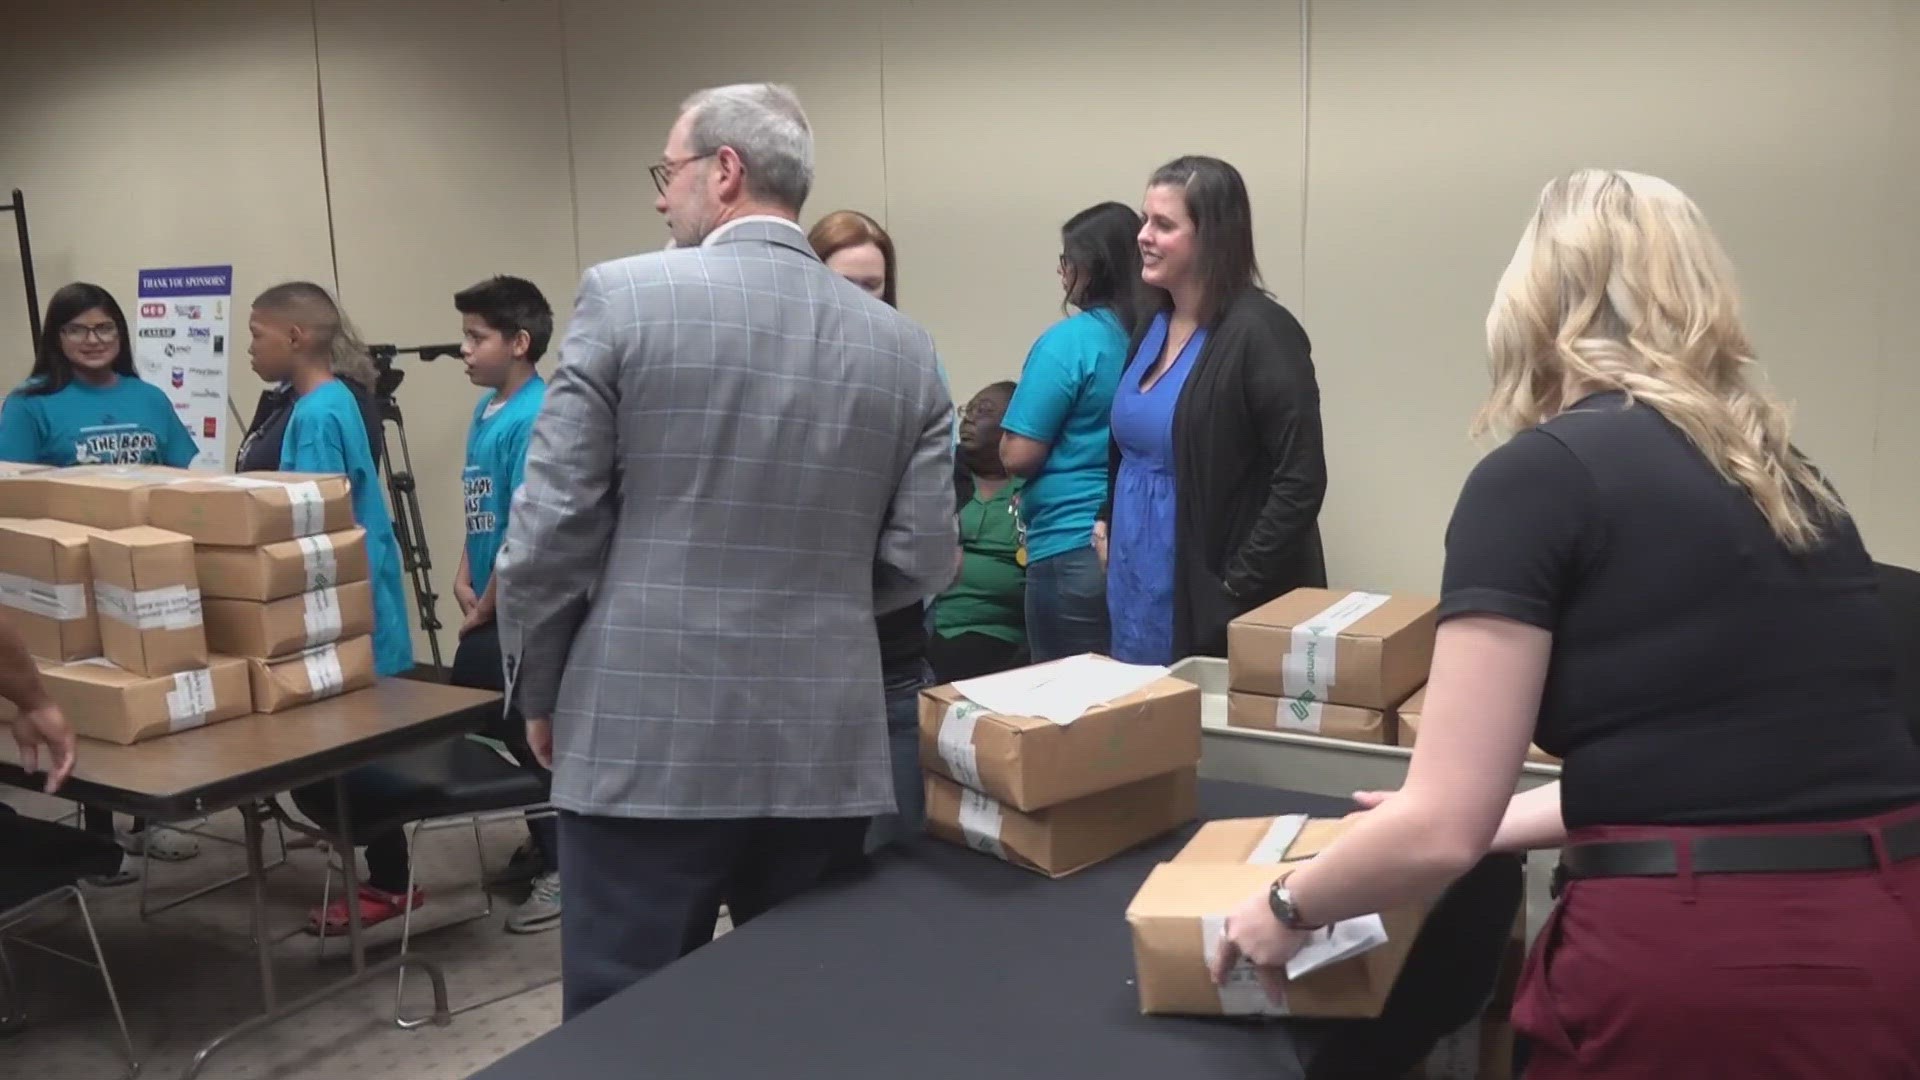 On Wednesday, AT&T handed out laptops to students and families in need.